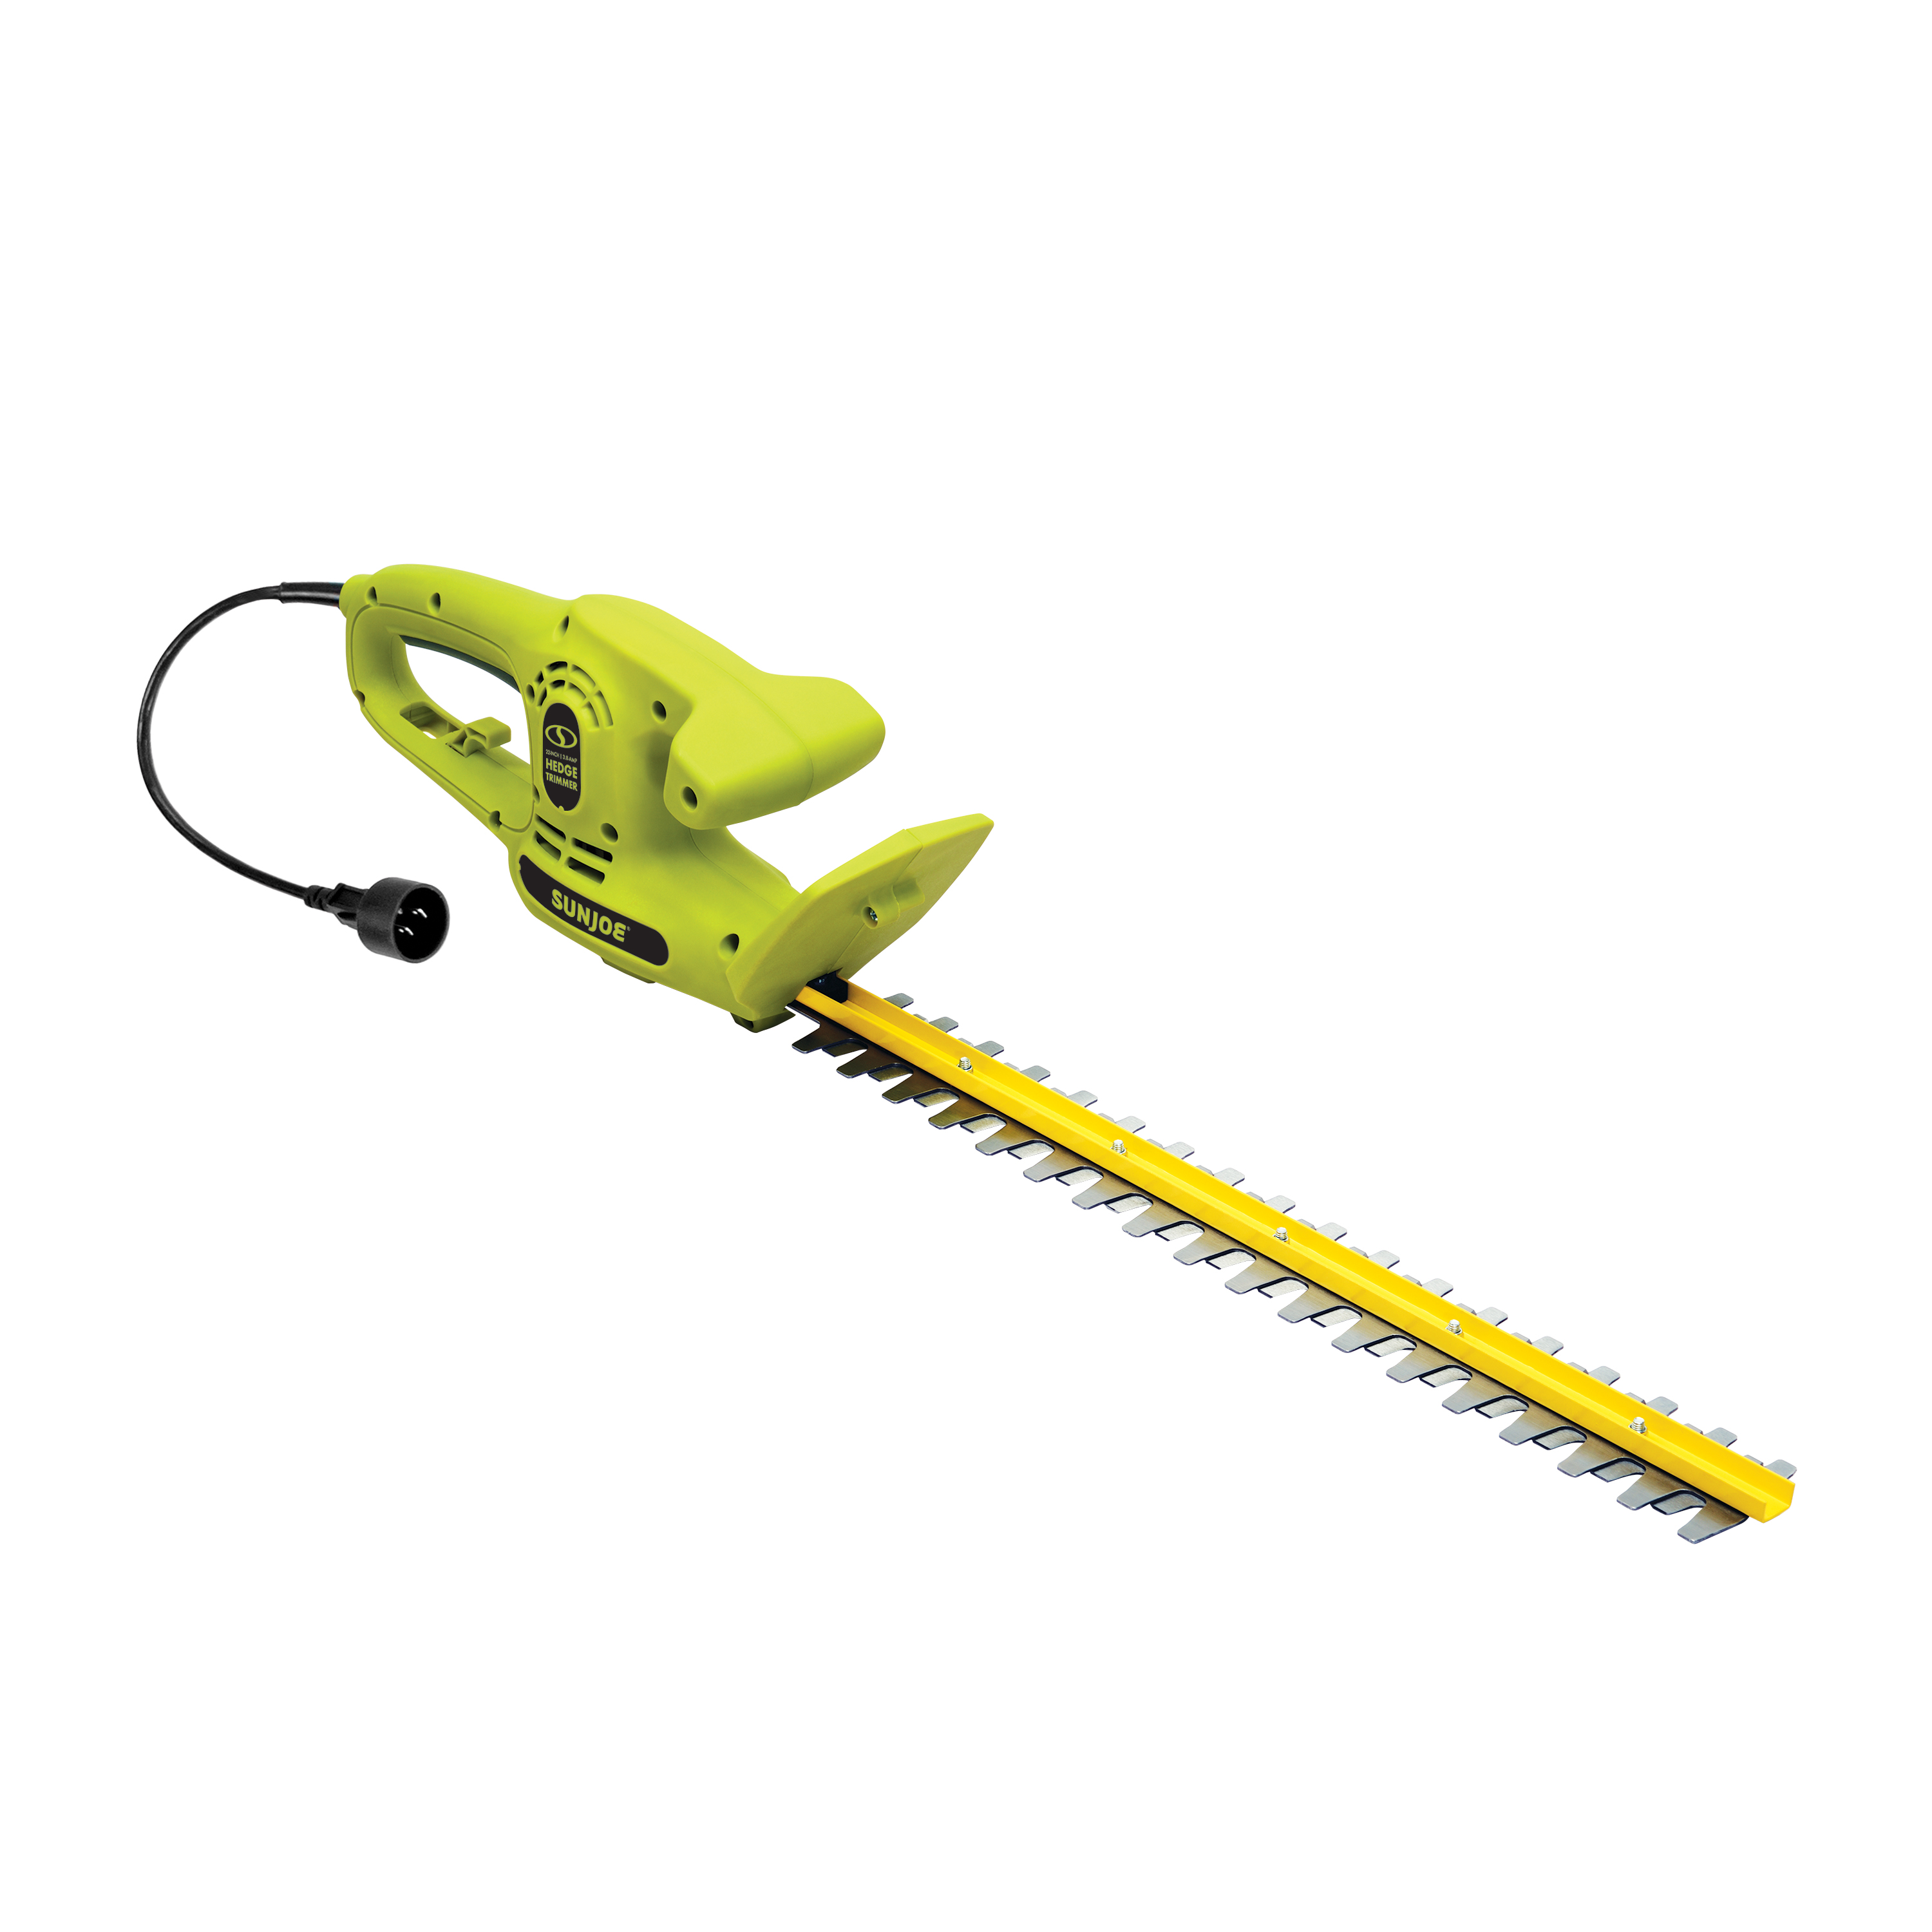 3.8A 22in Electric Hedge Trimmer